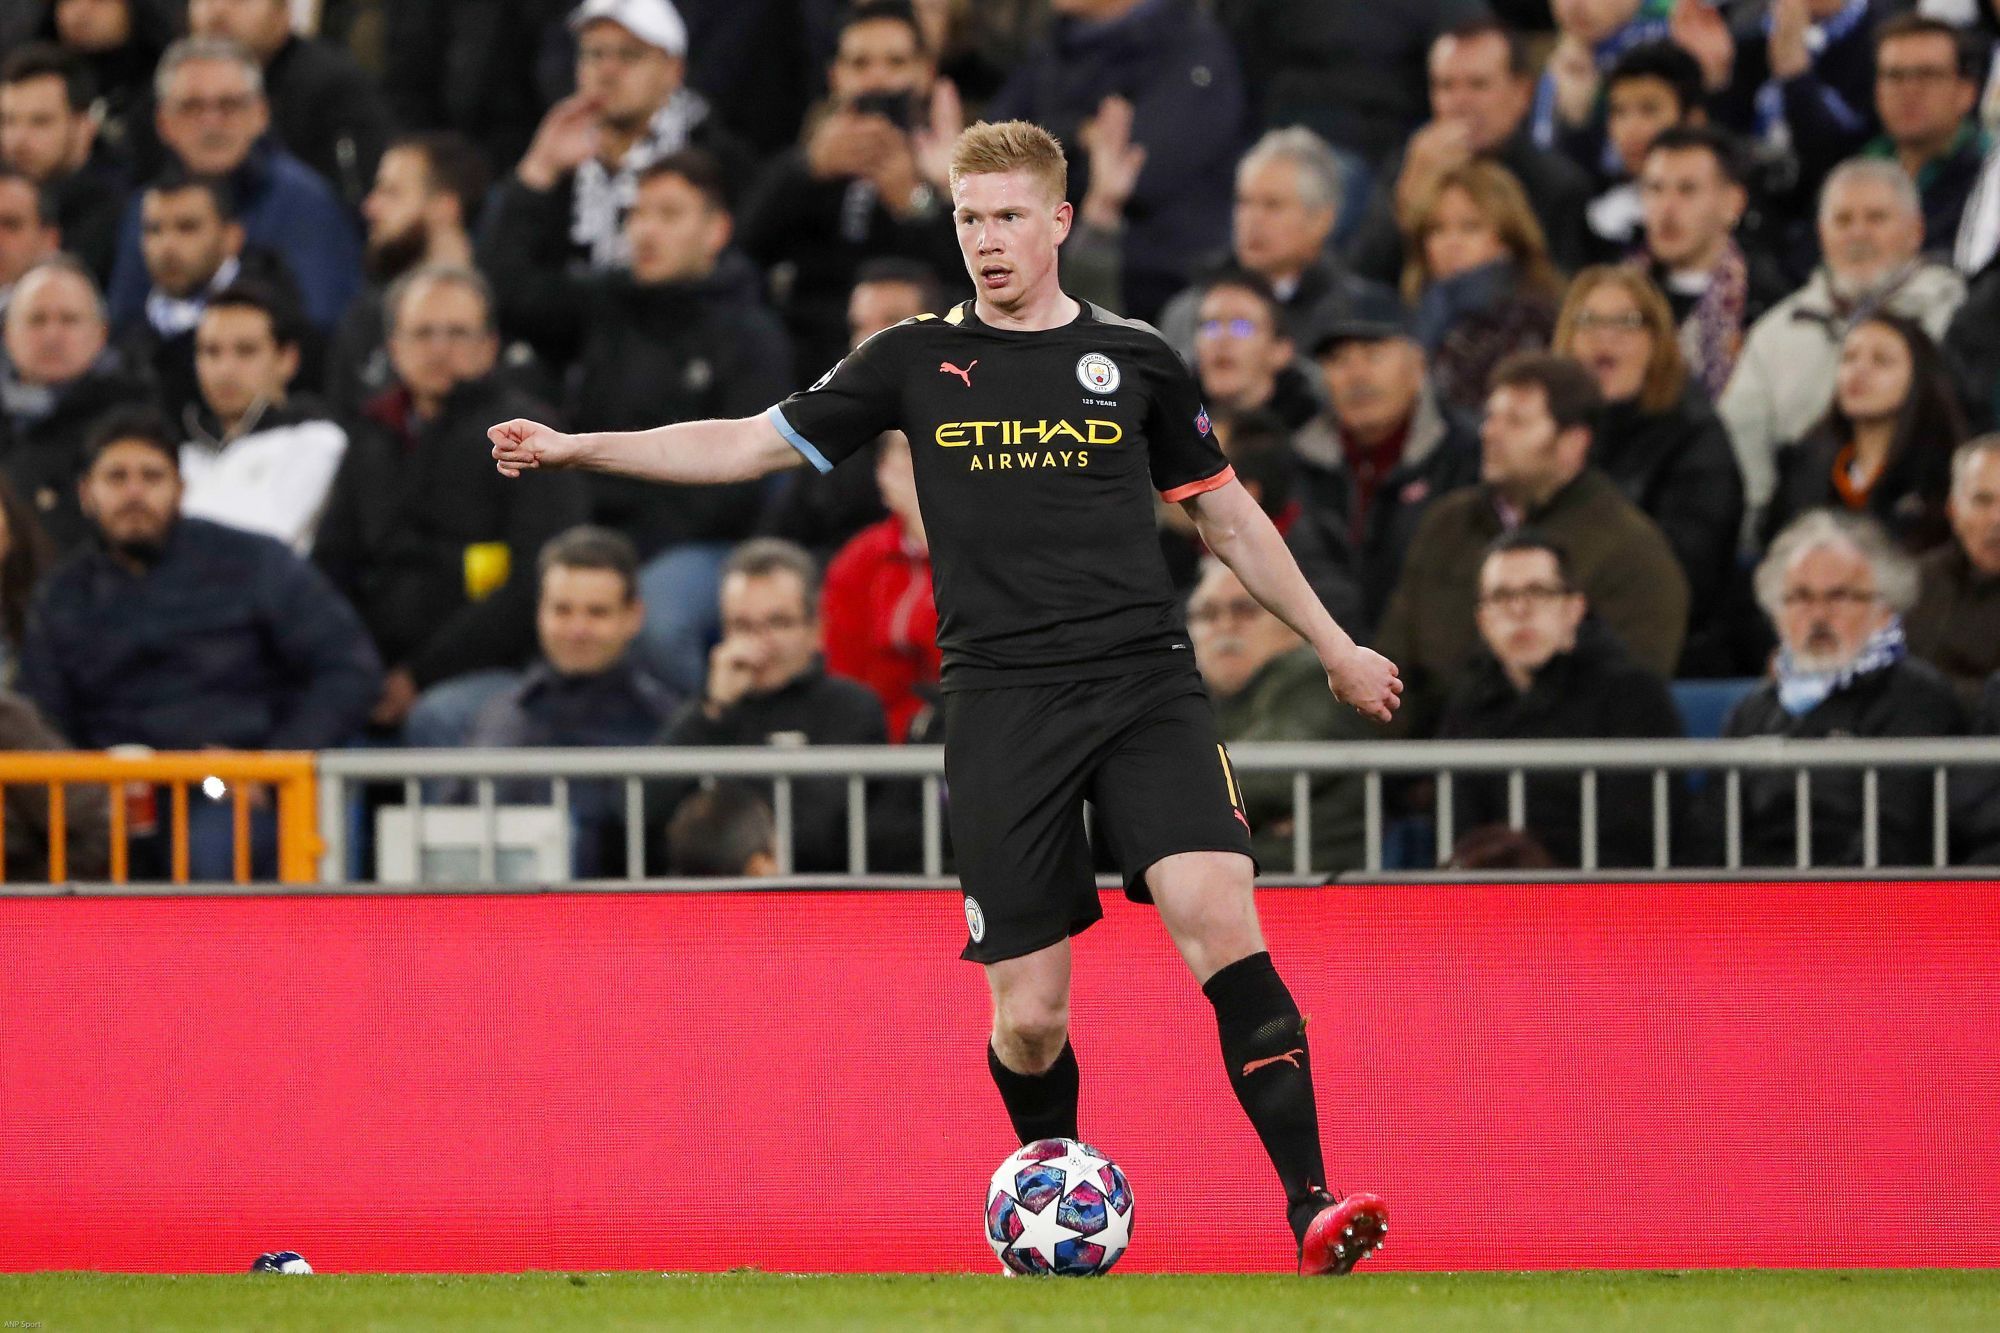 Kevin De Bruyne -Manchester City
Photo by Icon Sport